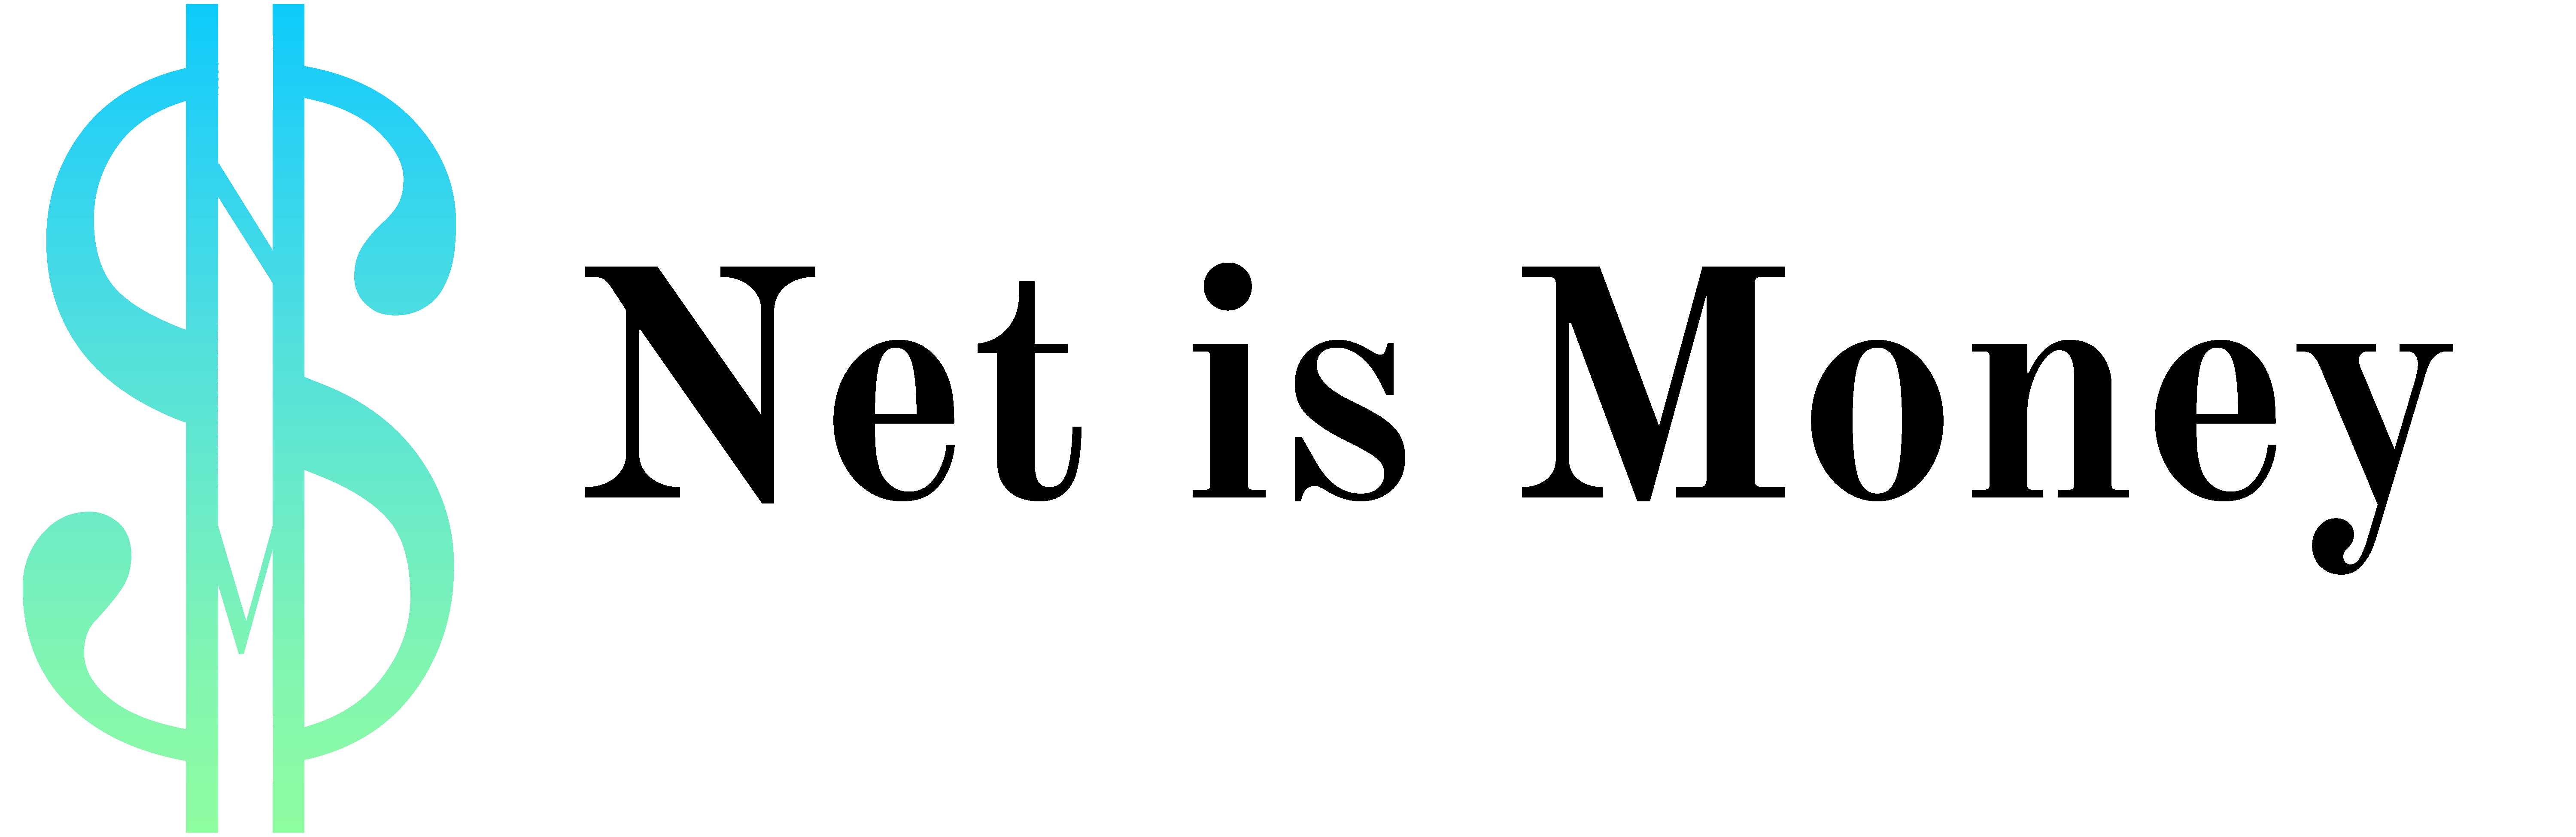 Net is Money logo with black text